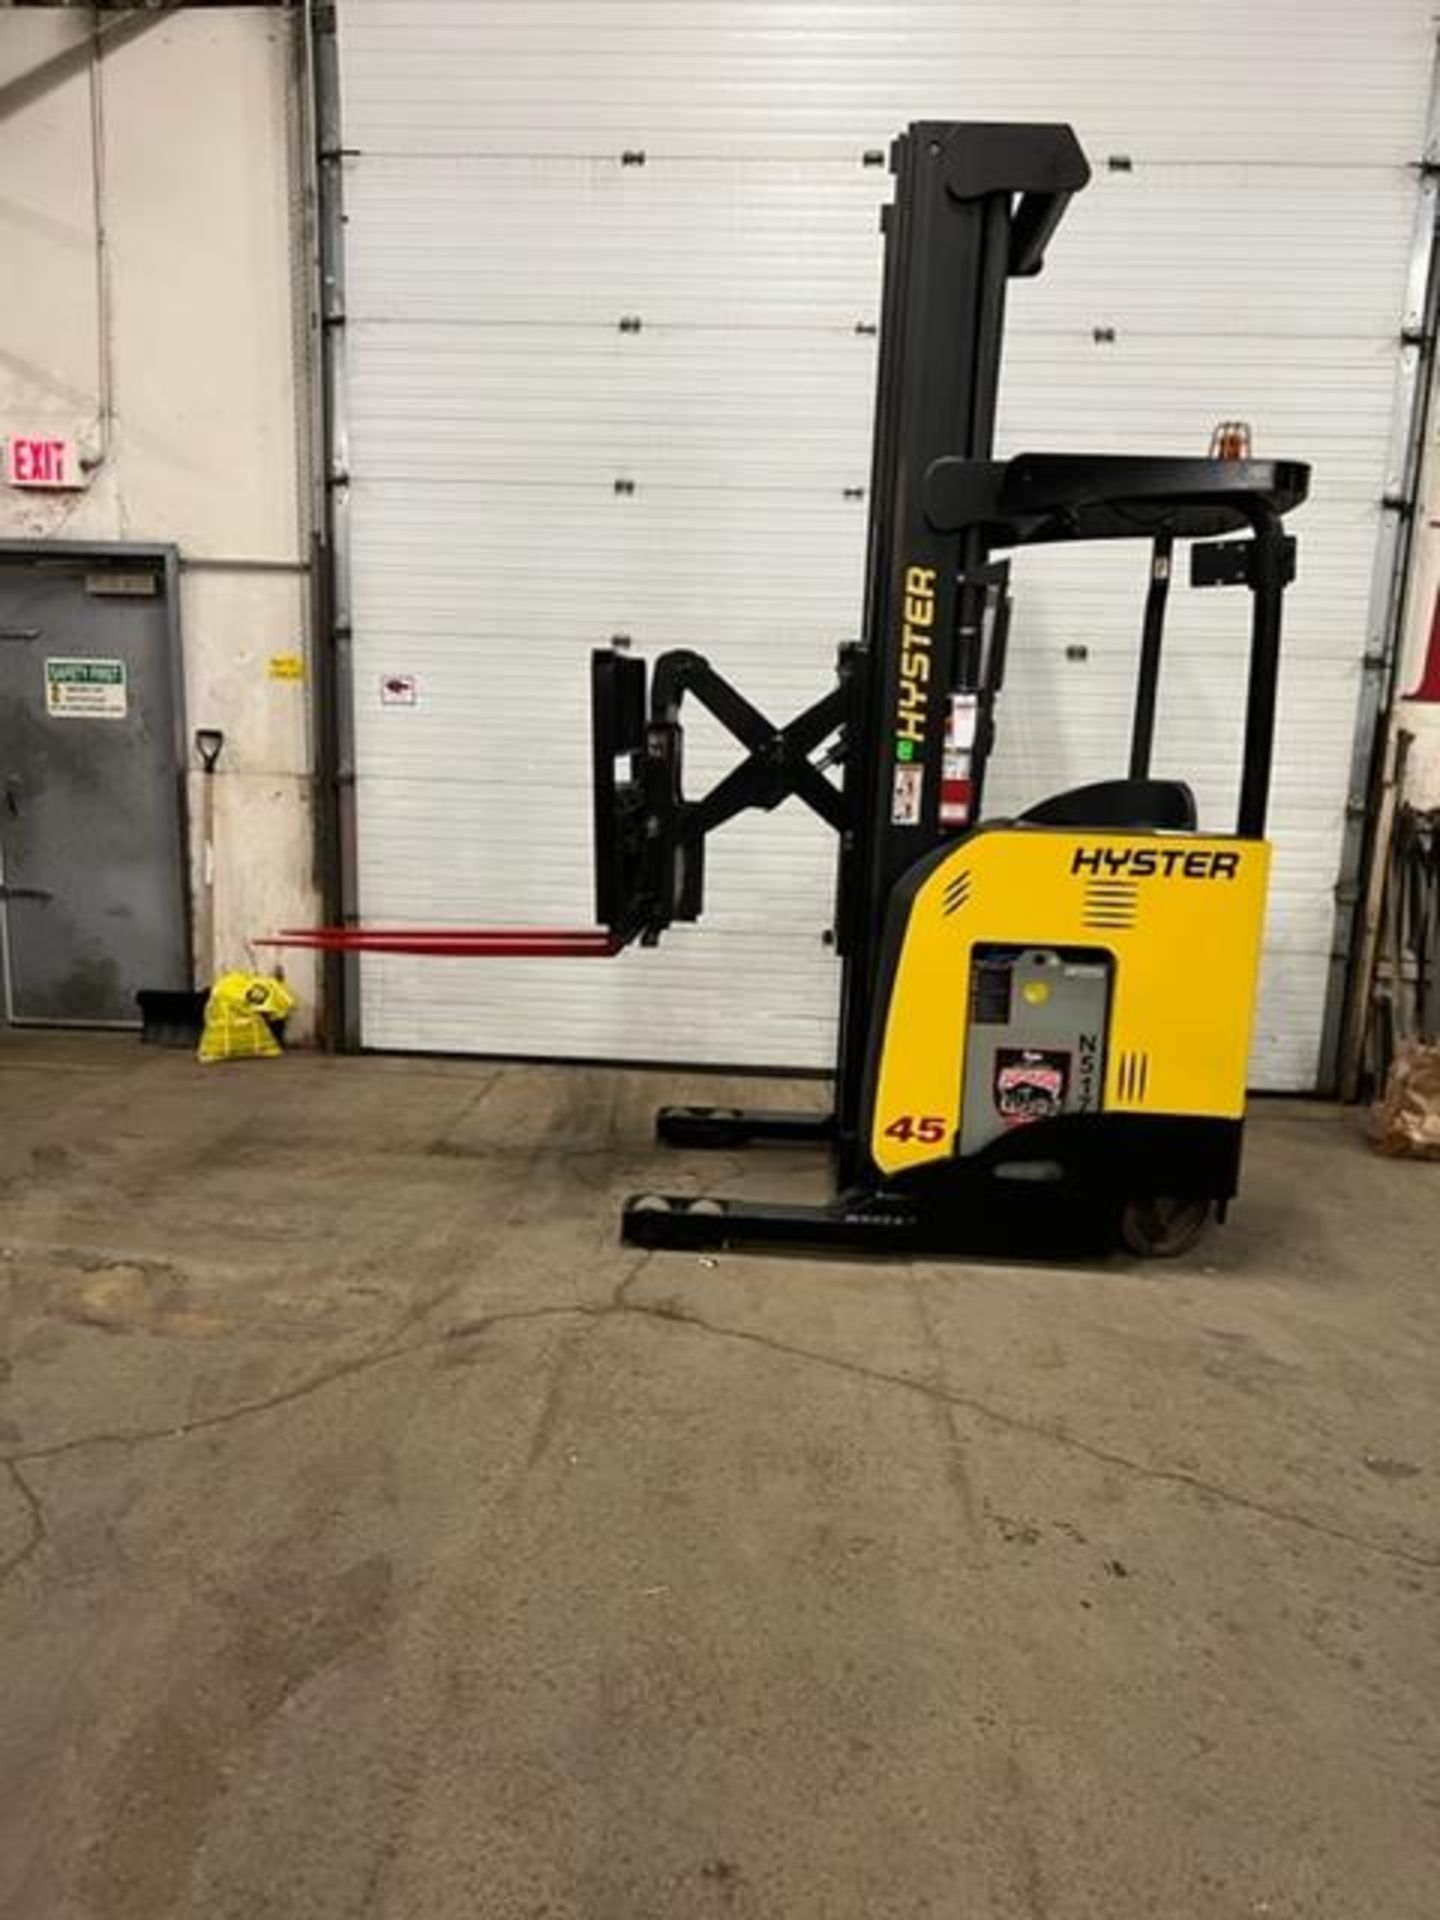 FREE CUSTOMS - 2016 Hyster 45 Reach Truck Pallet Lifter 4500lbs capacity electric MINT machine